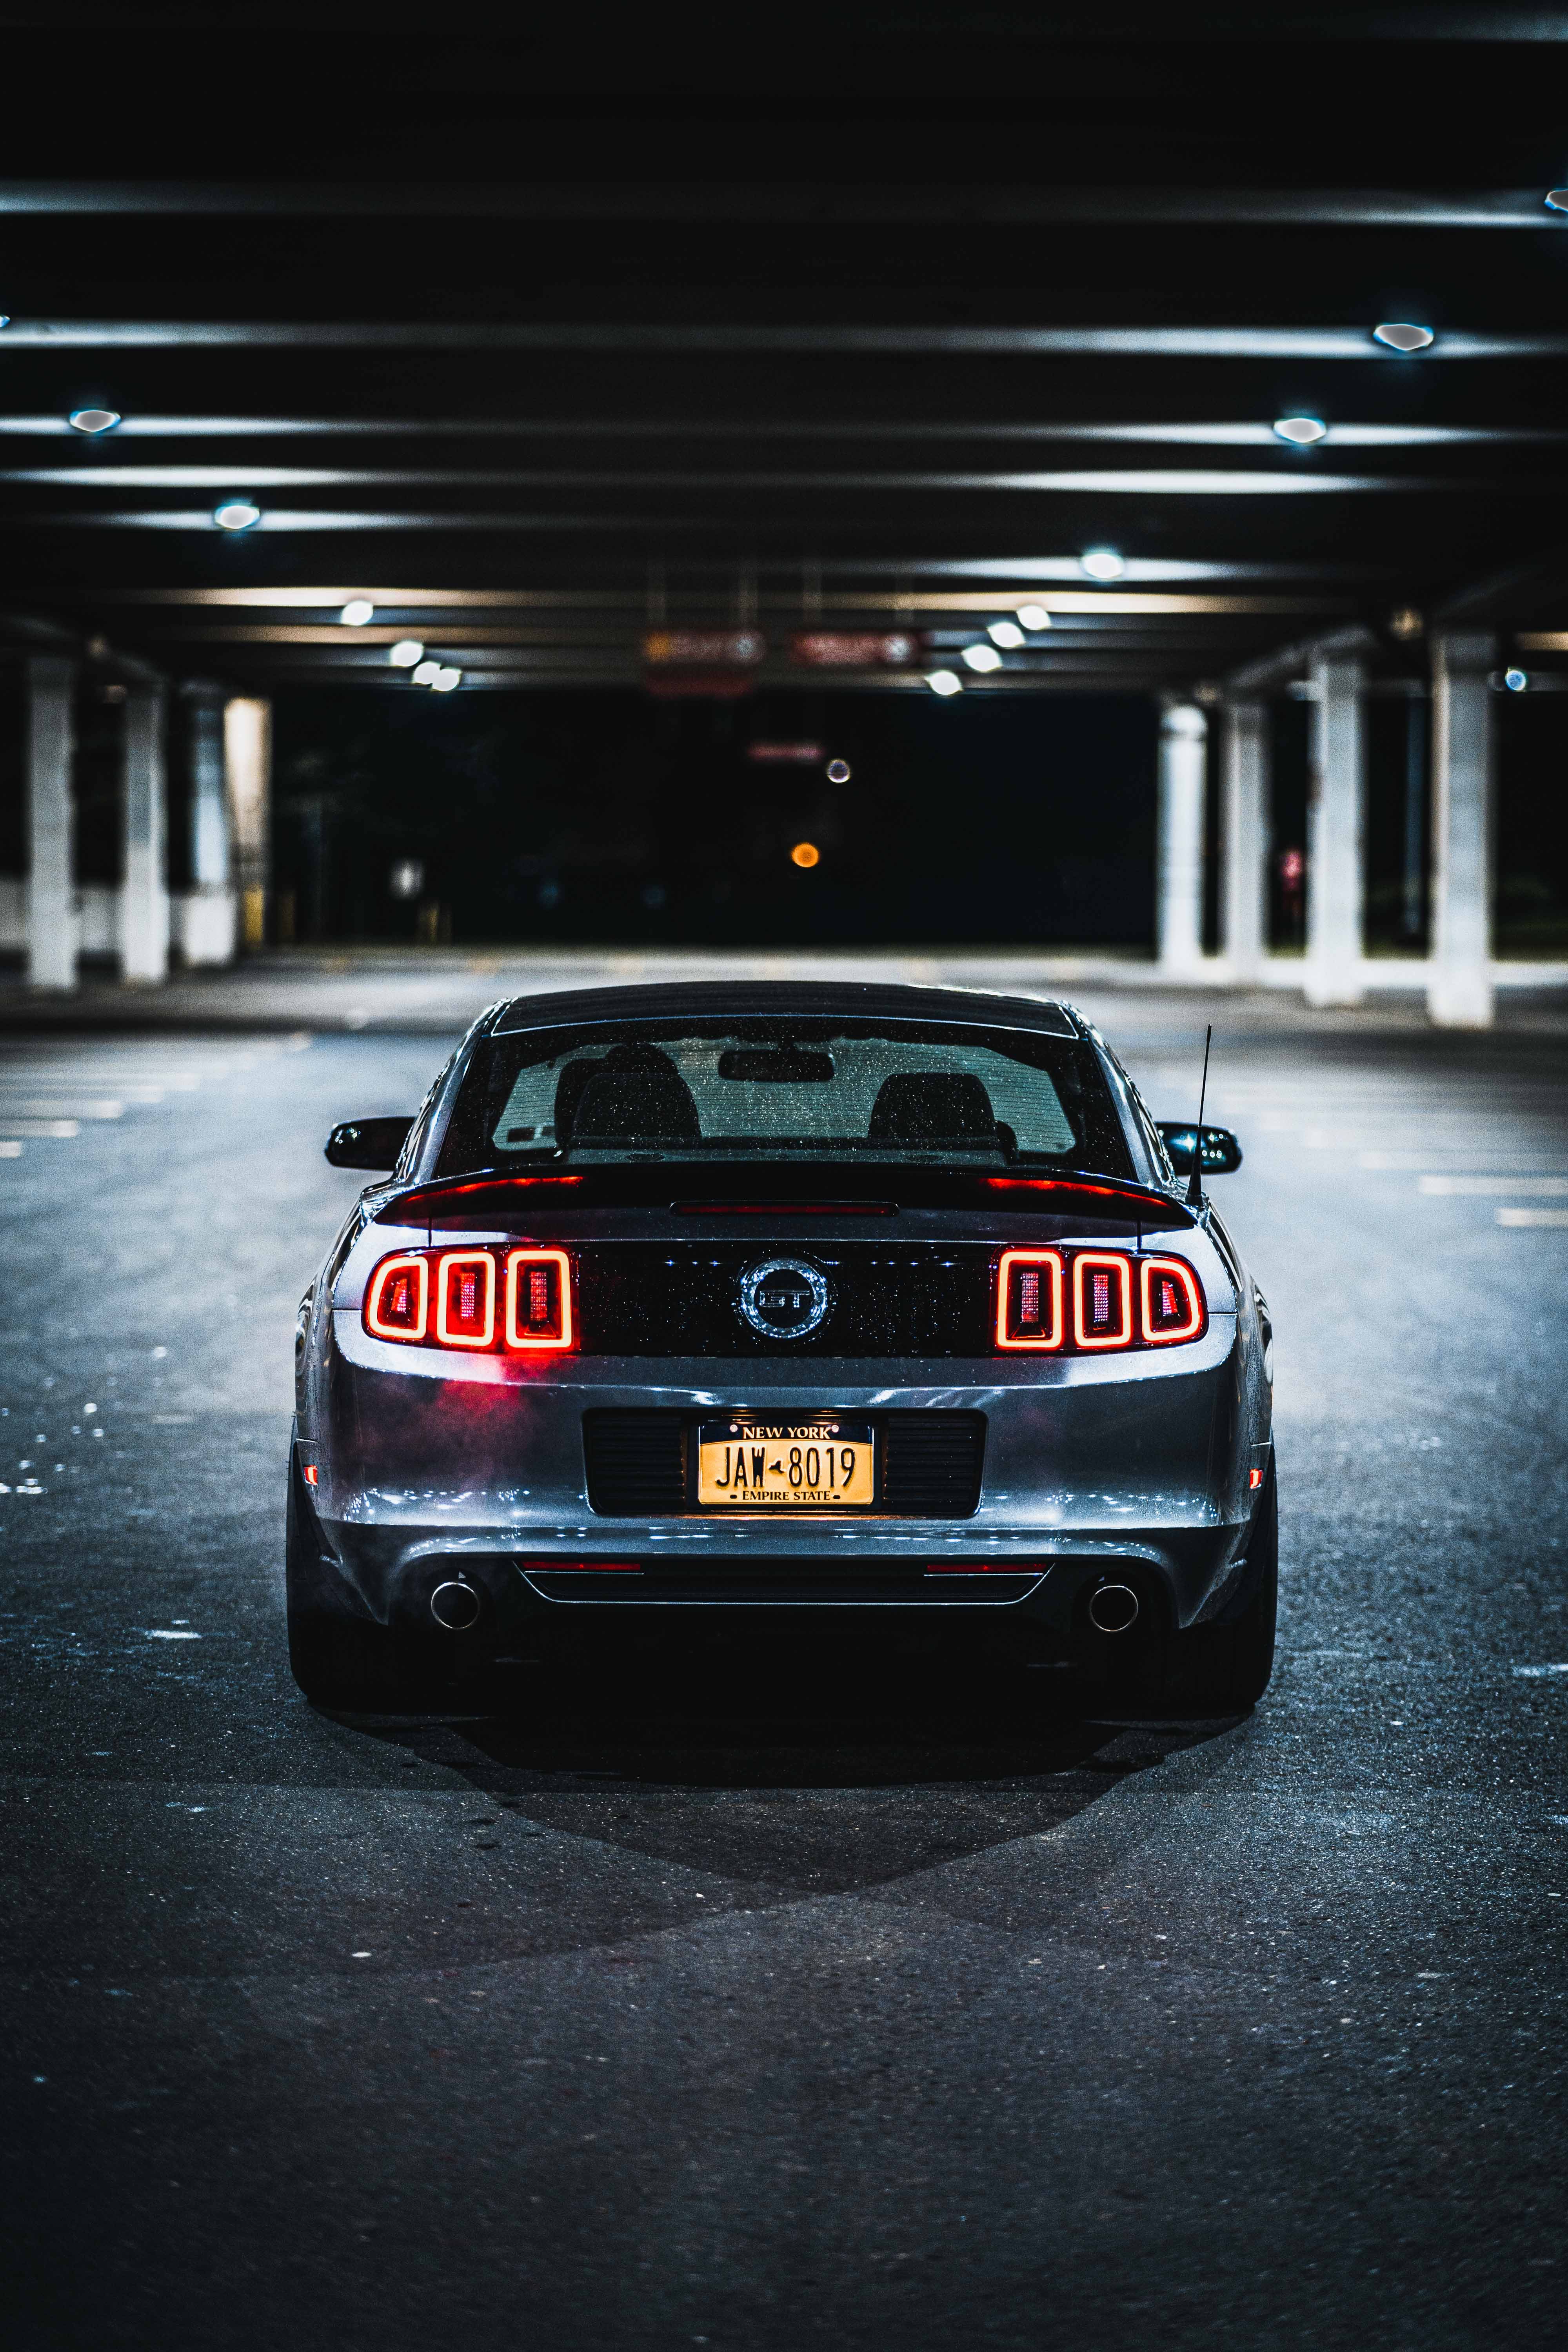 ford mustang, ford mustang gt, cars, lights, back view, rear view, headlights Phone Background